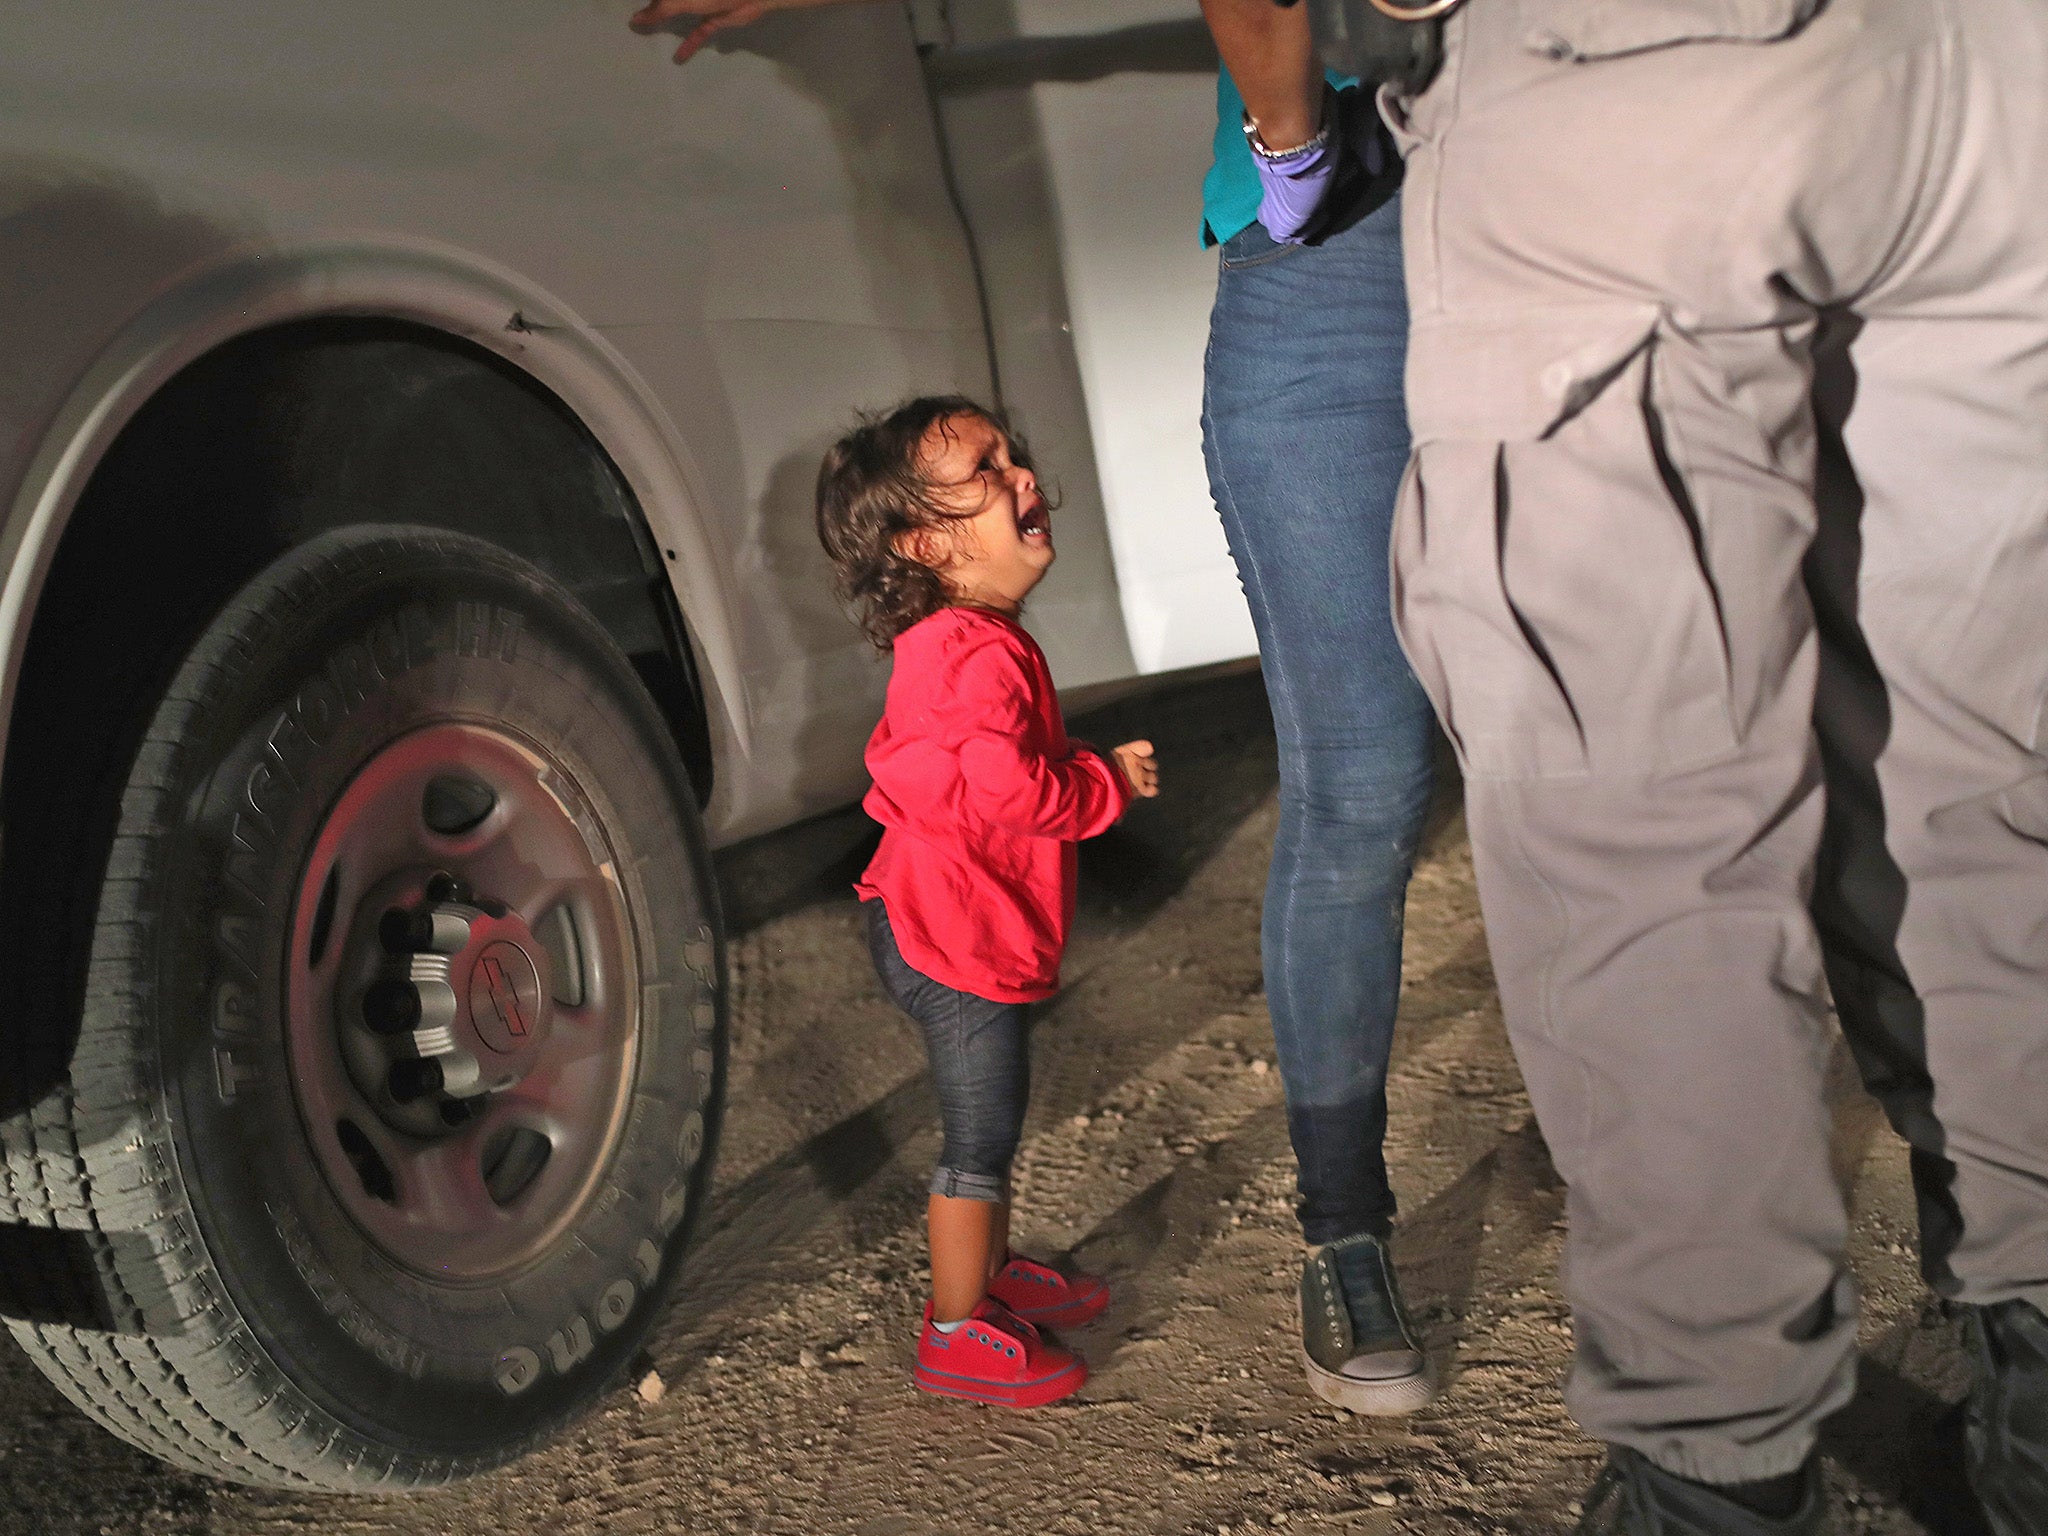 A two-year-old Honduran asylum seeker cries as her mother is searched and detained near the US-Mexico border